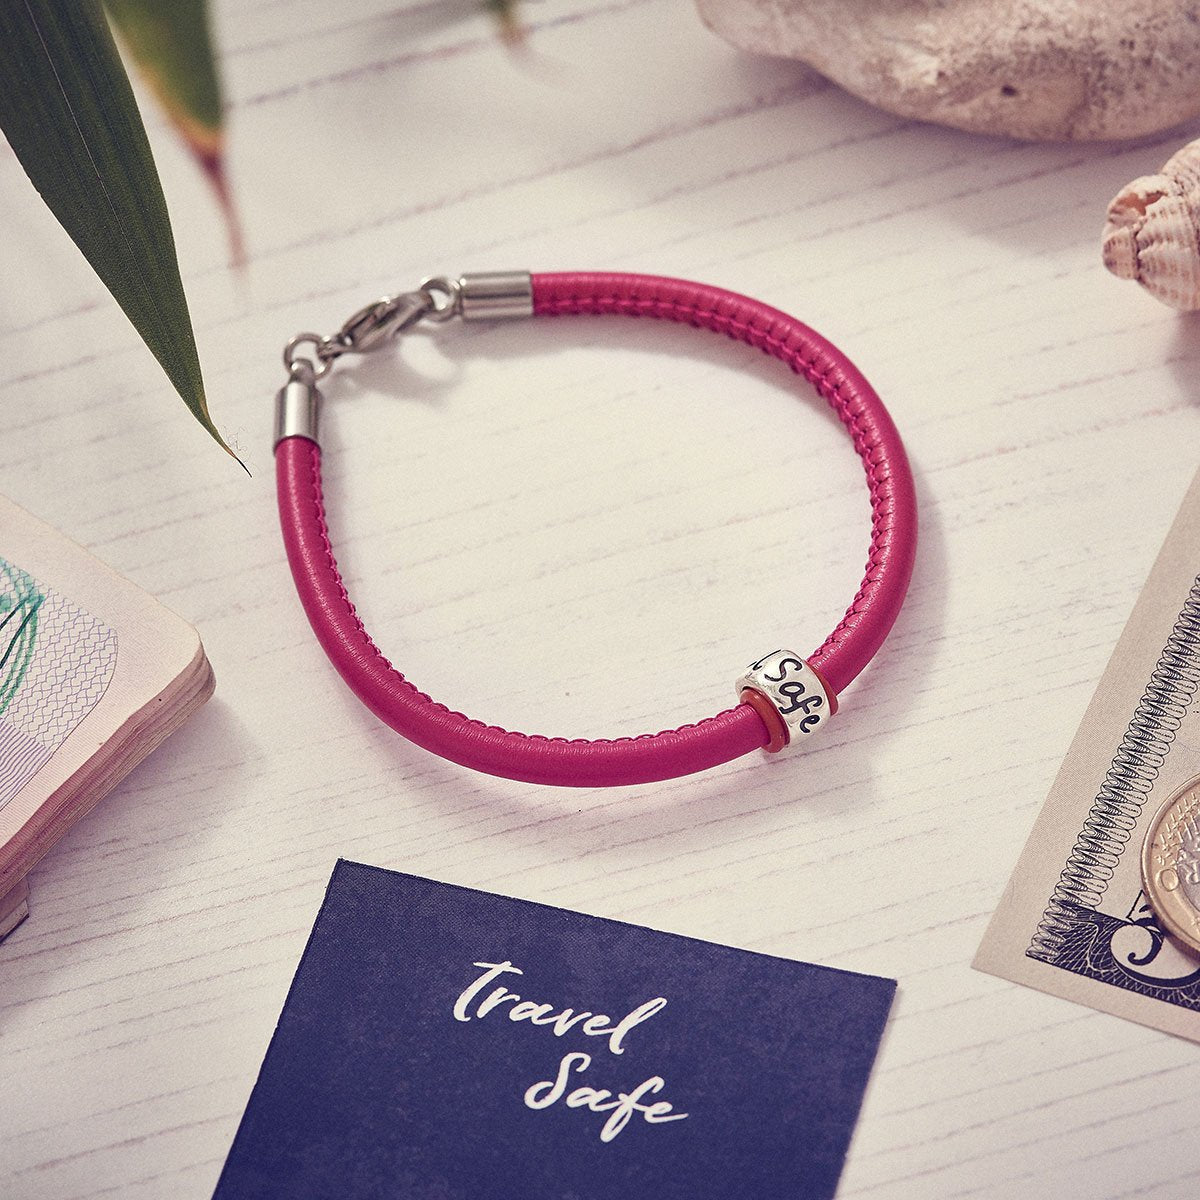 Travel Safe Silver &amp; Italian Stitched Leather Bracelet Pink - alternative travel gift from Off The map Brighton